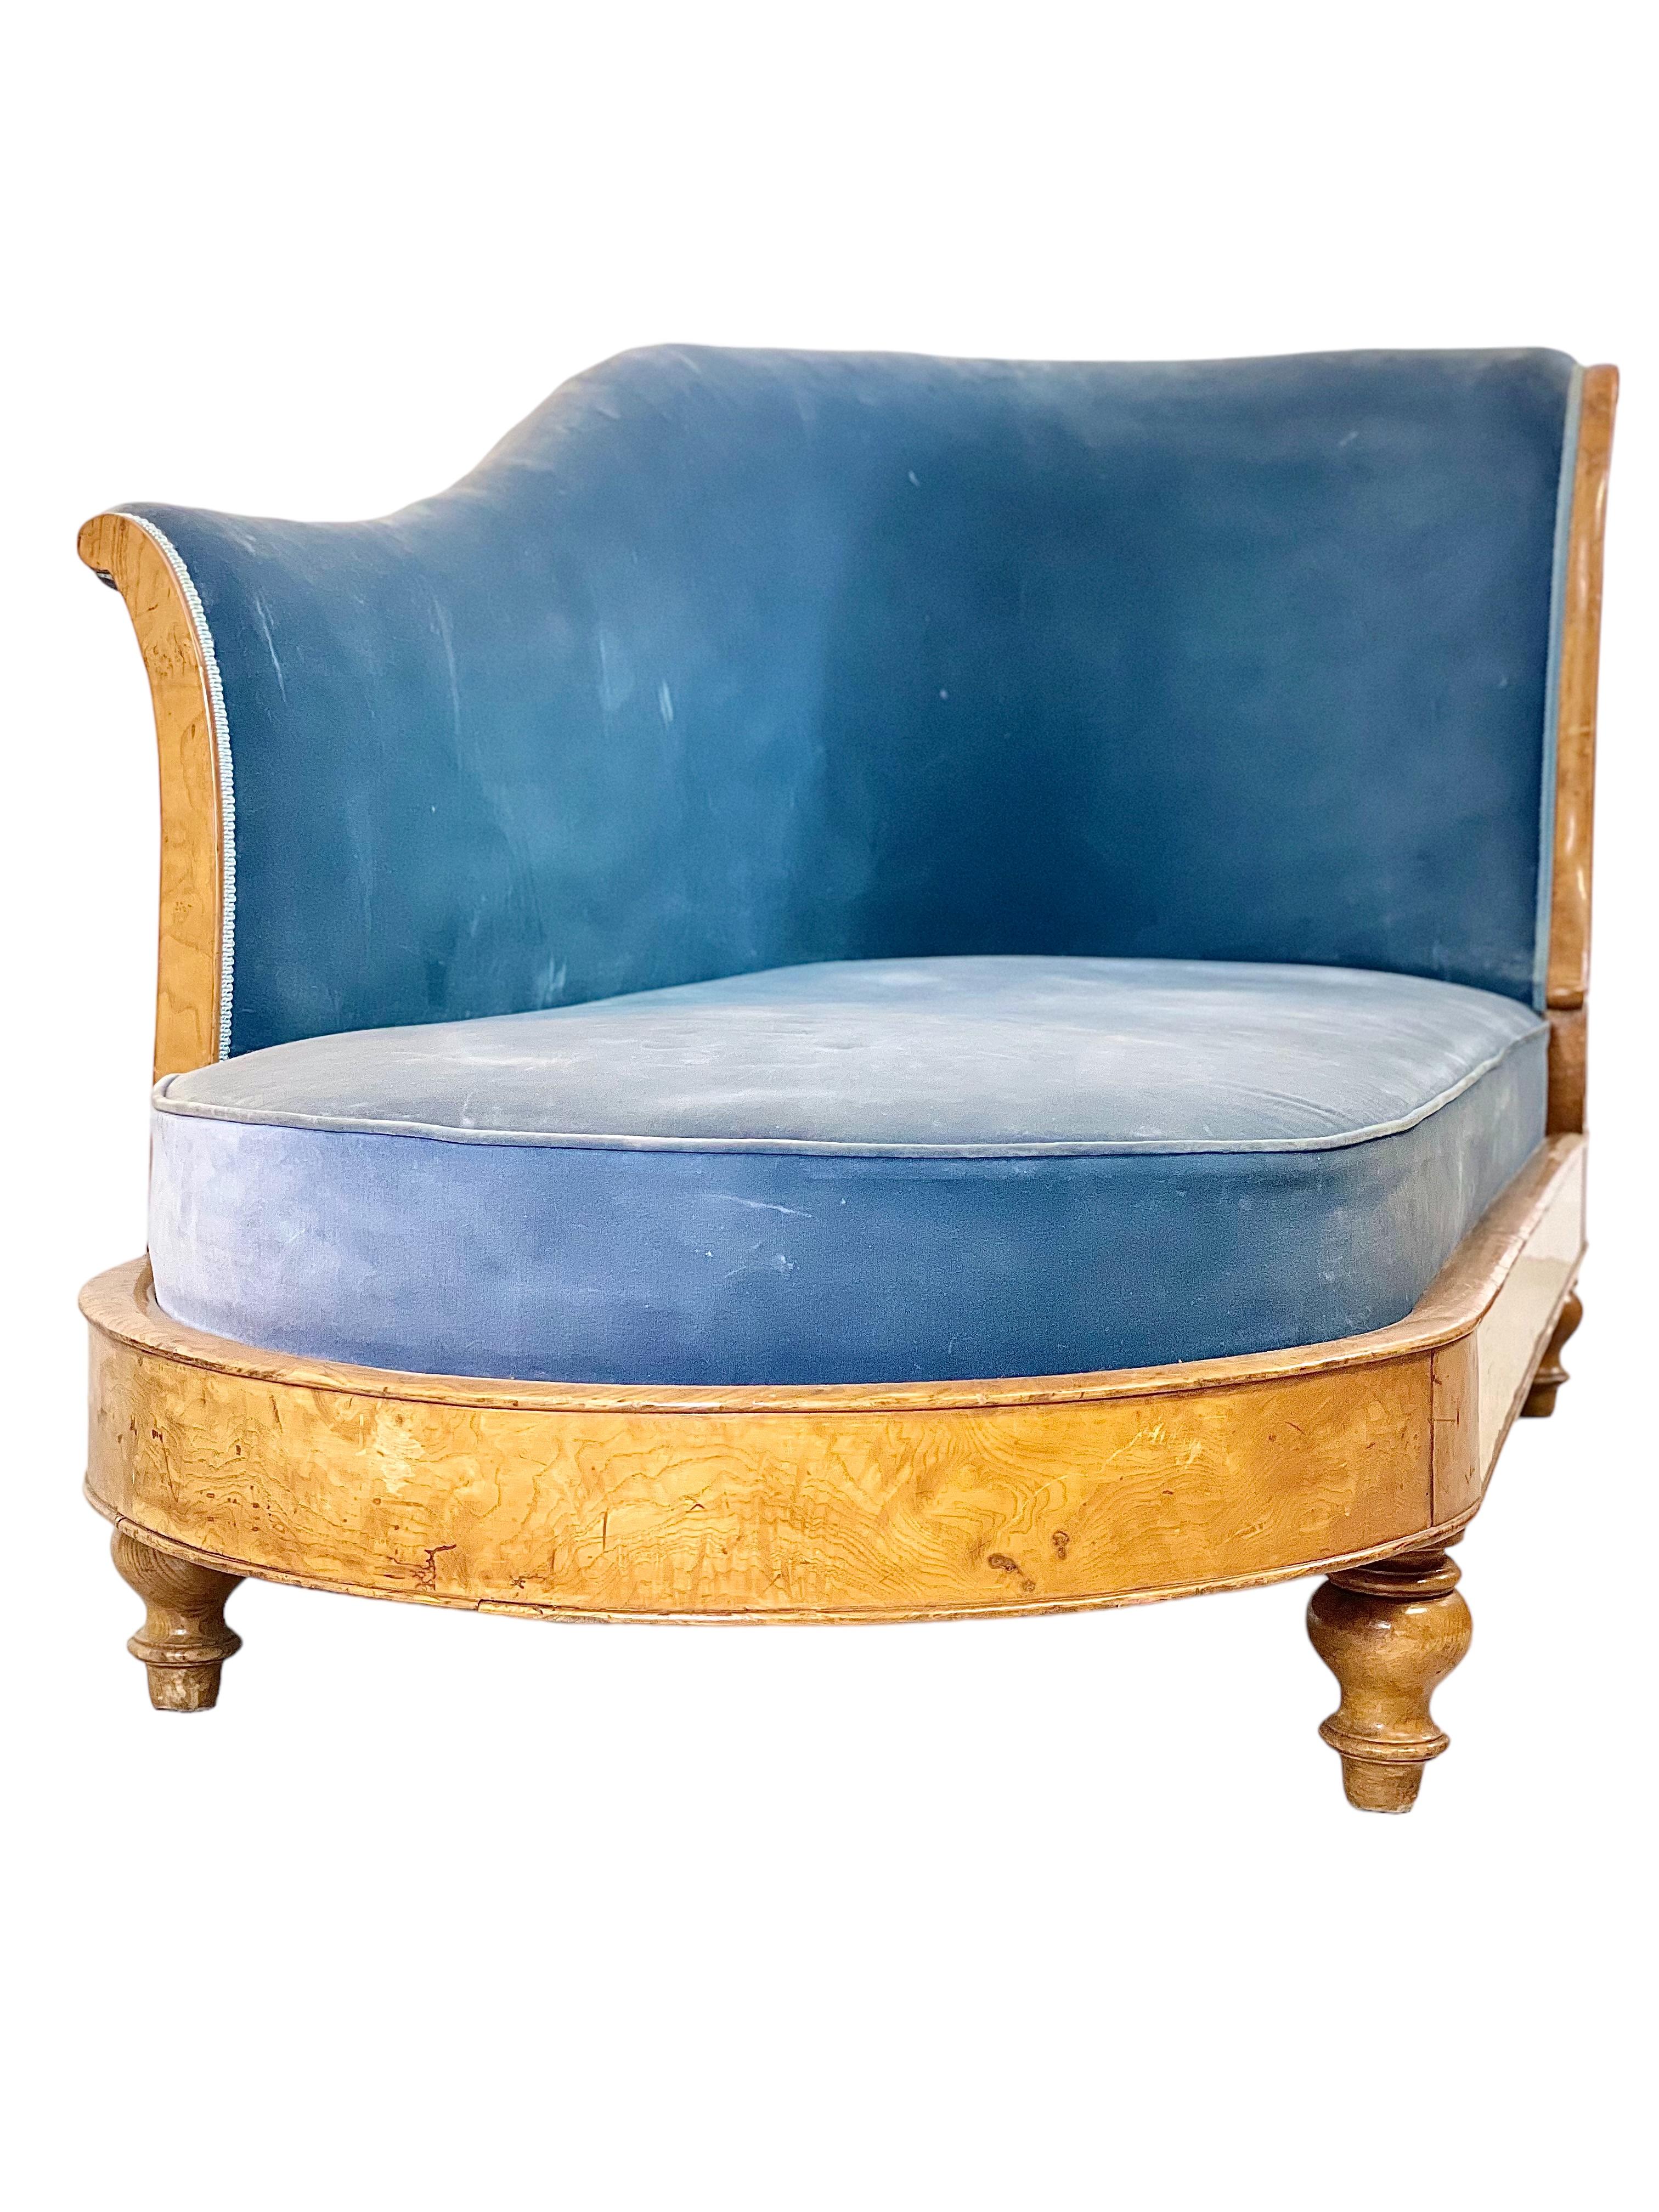 An eye-catching Charles X ‘Méridienne’ sofa, upholstered in blue velvet. The frame is finished in a light-coloured wood veneer, which highlights the simple but elegant design of the wraparound apron, with only a single palmette adorning its front